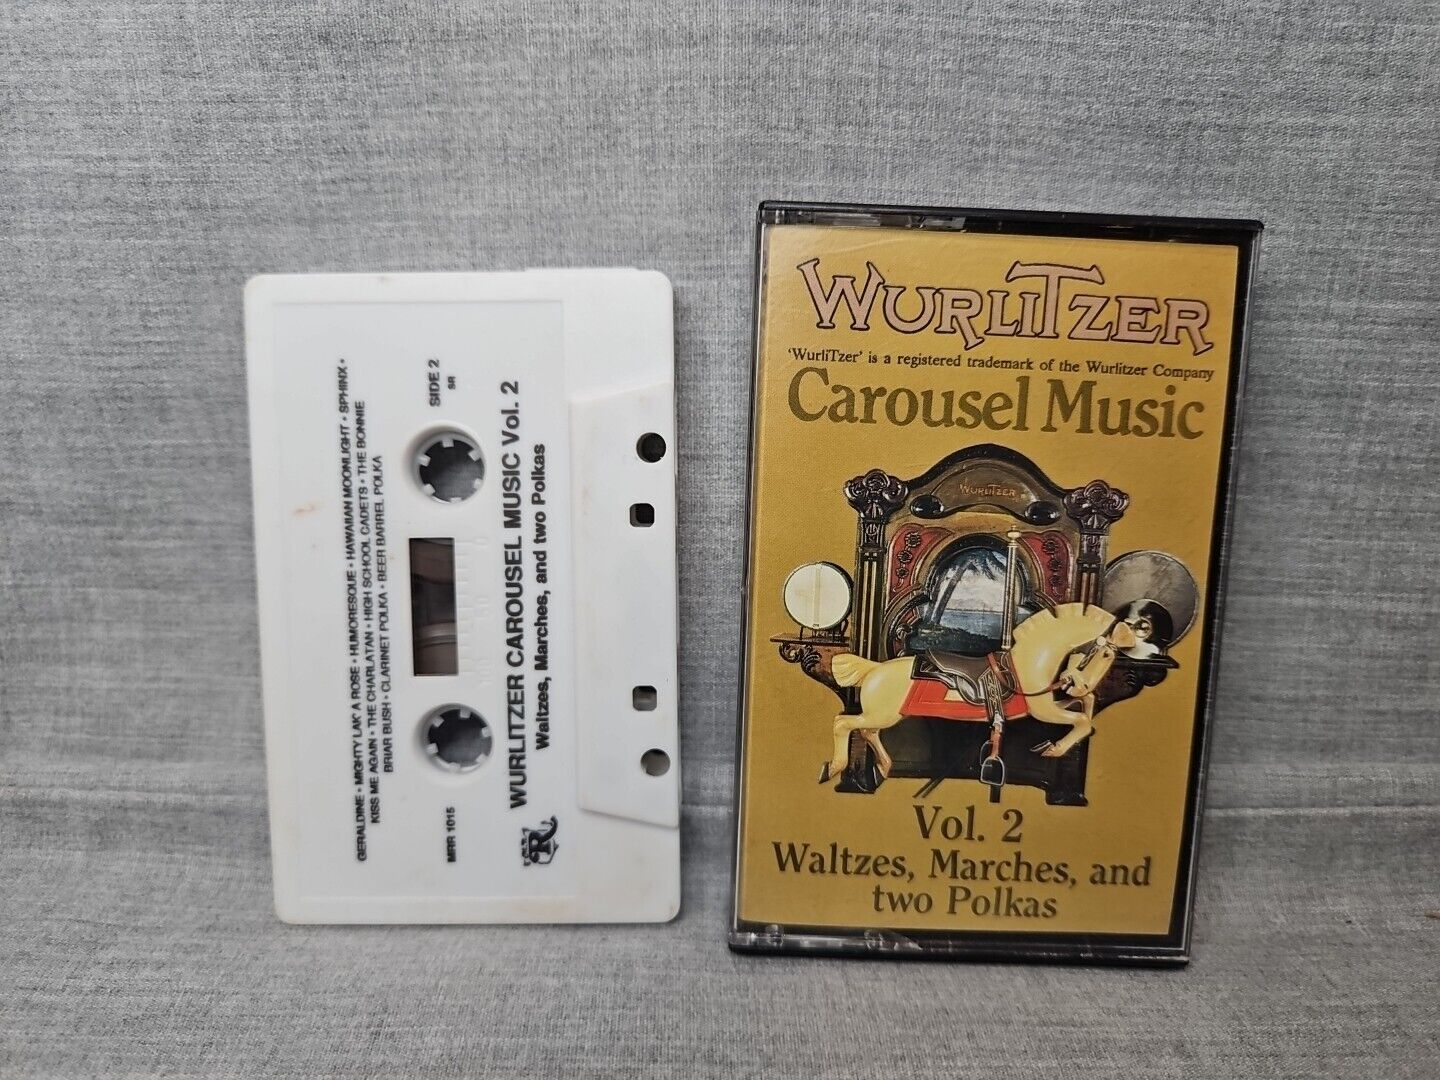 Wurlitzer Carousel Music Vol. 2 Waltzes, Marches, and Two Polkas (Cassette) 1015